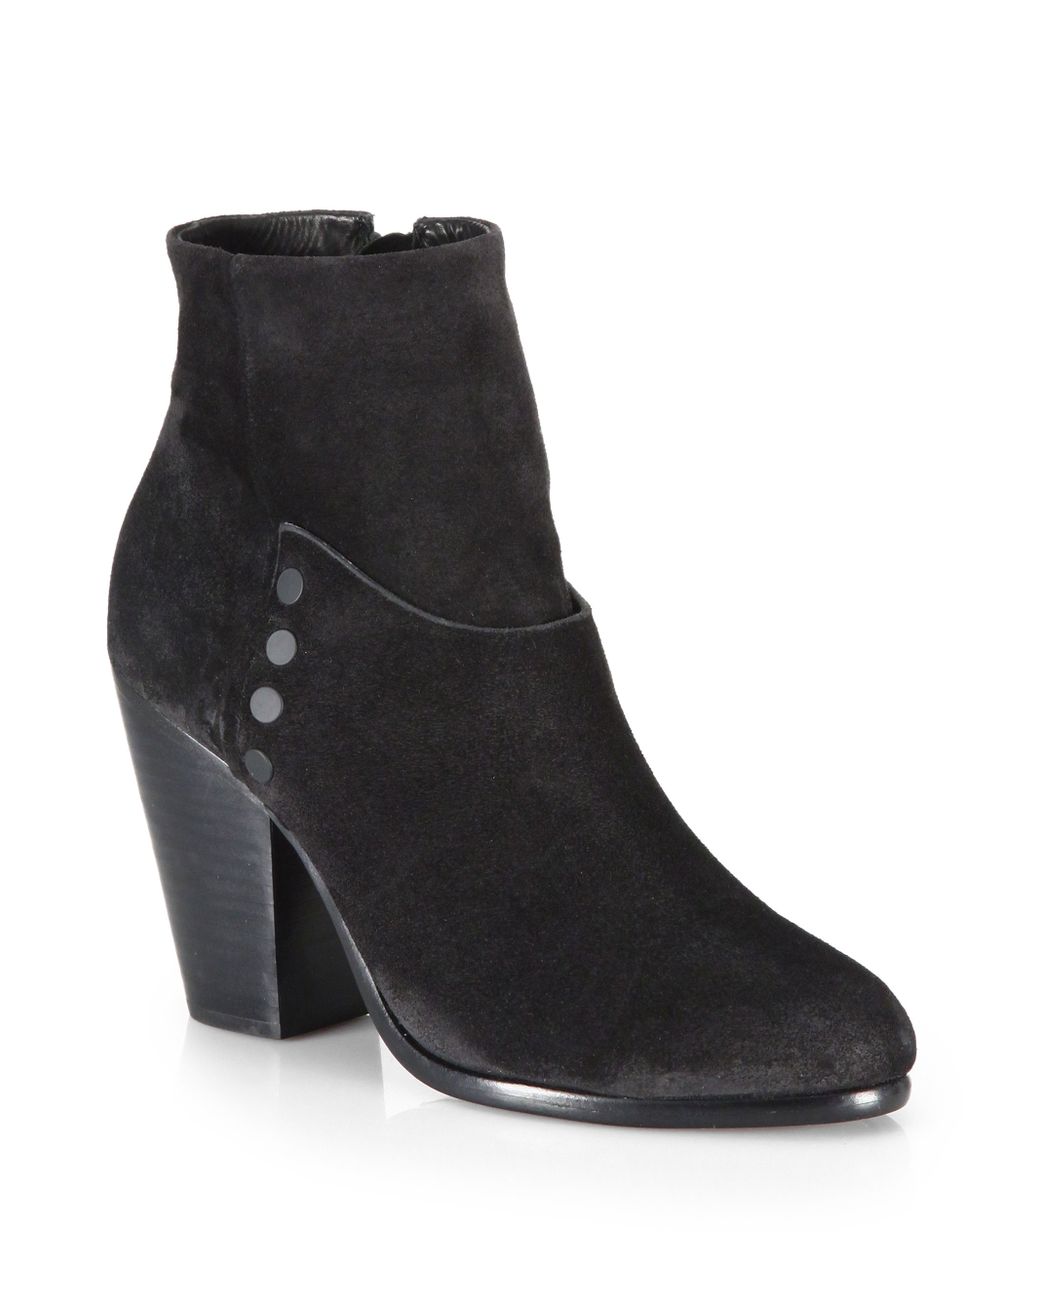 Rag & bone Kendall Suede Ankle Boots in Black - Save 50% | Lyst